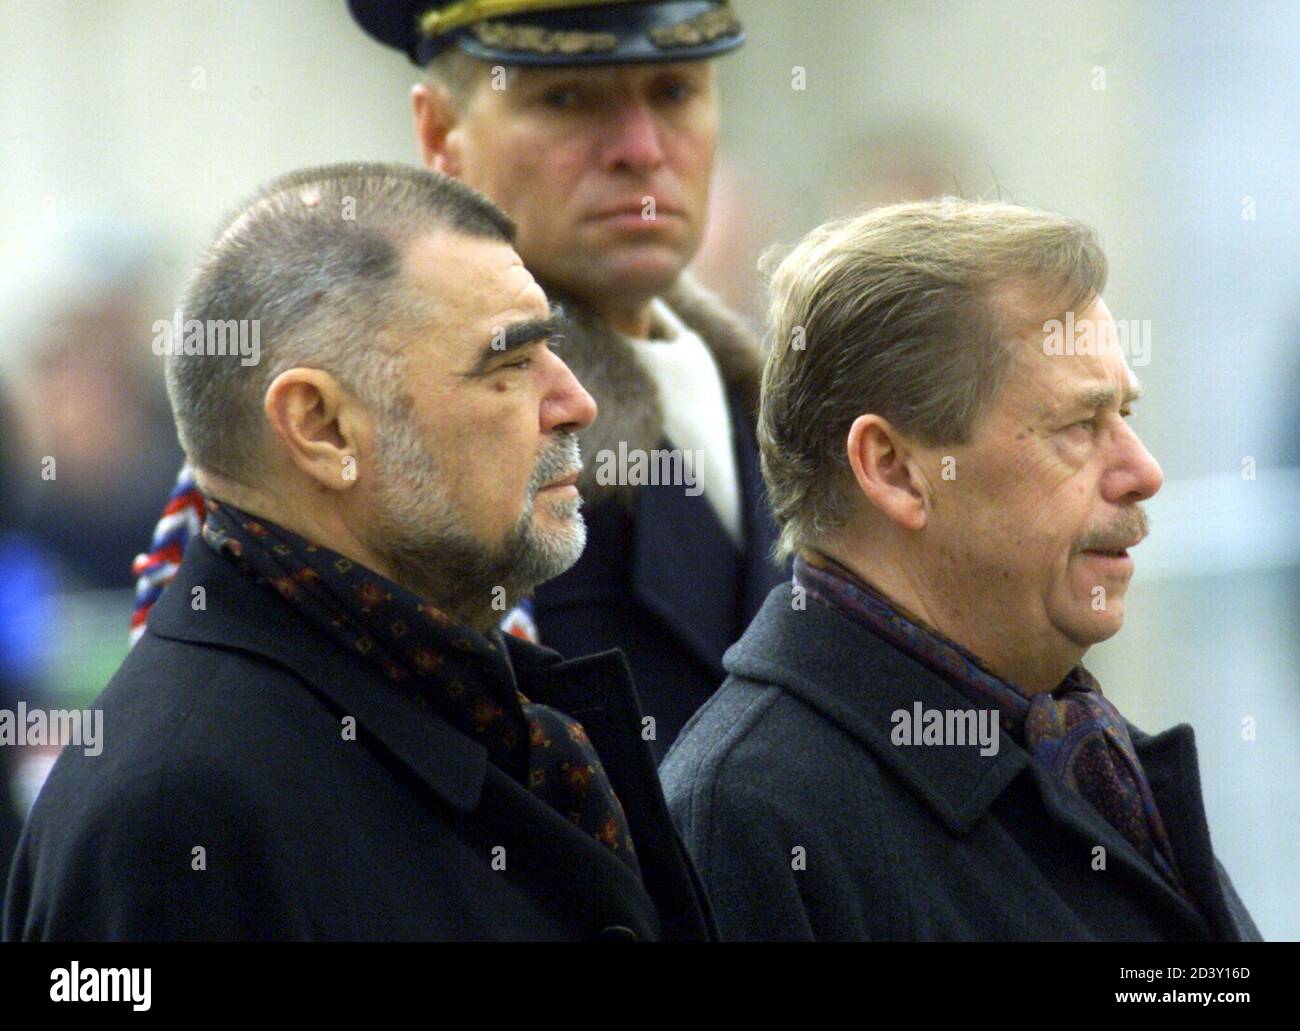 A Castle Guard officer (rear) looks at Croatian President Stjepan Mesic (L) and his Czech host President Vaclav Havel (R) during the official welcoming ceremony at Prague Castle on March 6, 2001. The Croatian President is on a short state visit to the Czech Republic.  PJ/WS Stock Photo